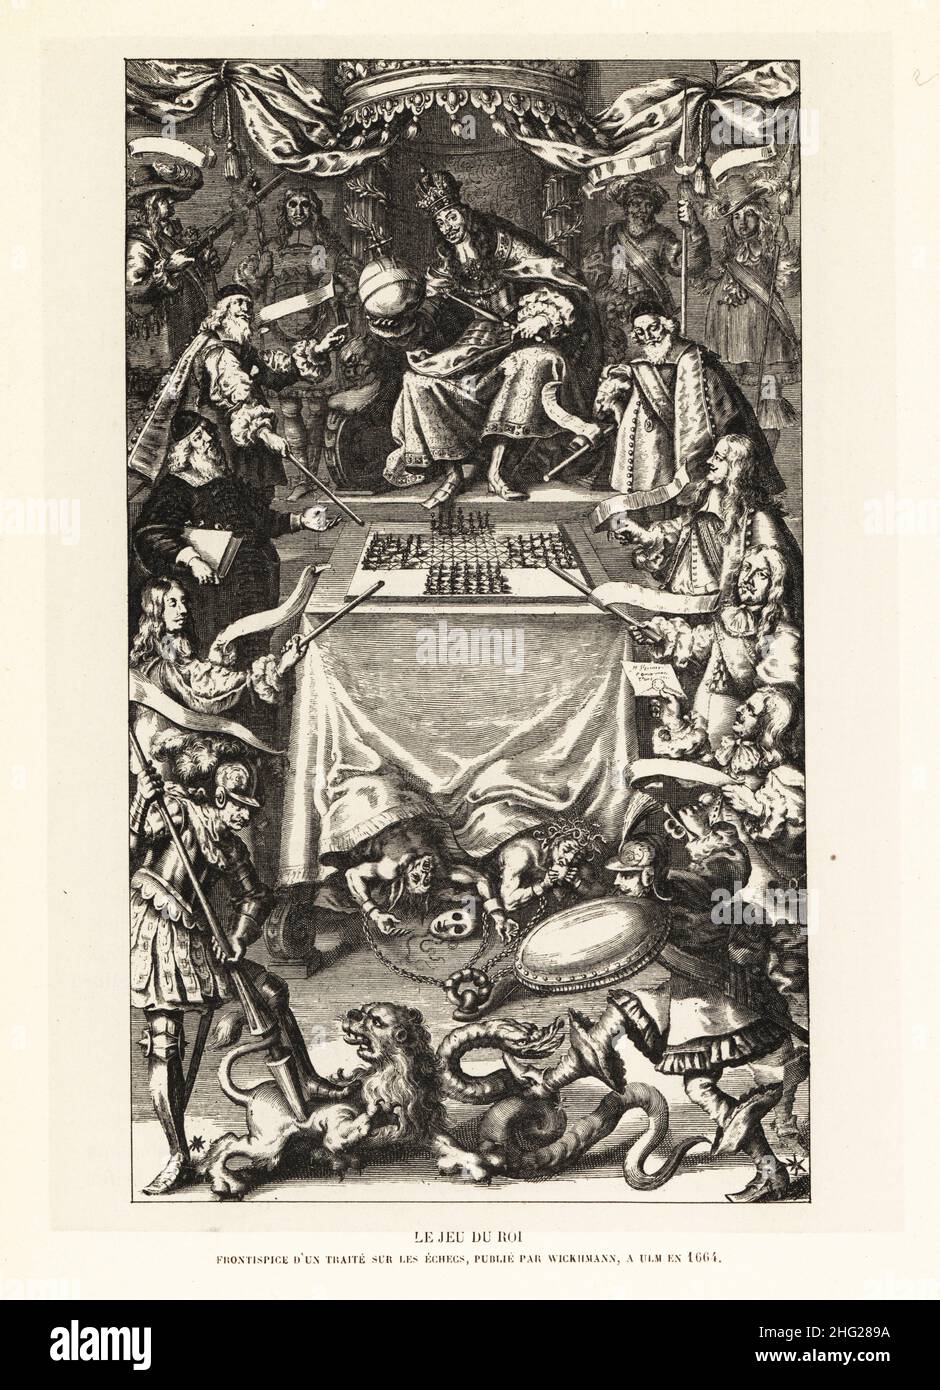 Allegorical print showing a game of four-handed chess, The Royal Game or Le jeu du Roi. A king with orb and sceptre watches courtiers representing power, law, prudence, magnanimity move chess pieces with batons. Frontispiece by Jonas Arnold to New-erfundenes Grosses Konigs-Spiel by Christoph Weickhmann, Ulm, 1664. Lithograph from Henry Rene d’Allemagne’s Recreations et Passe-Temps, Games and Pastimes, Hachette, Paris, 1906. Stock Photo